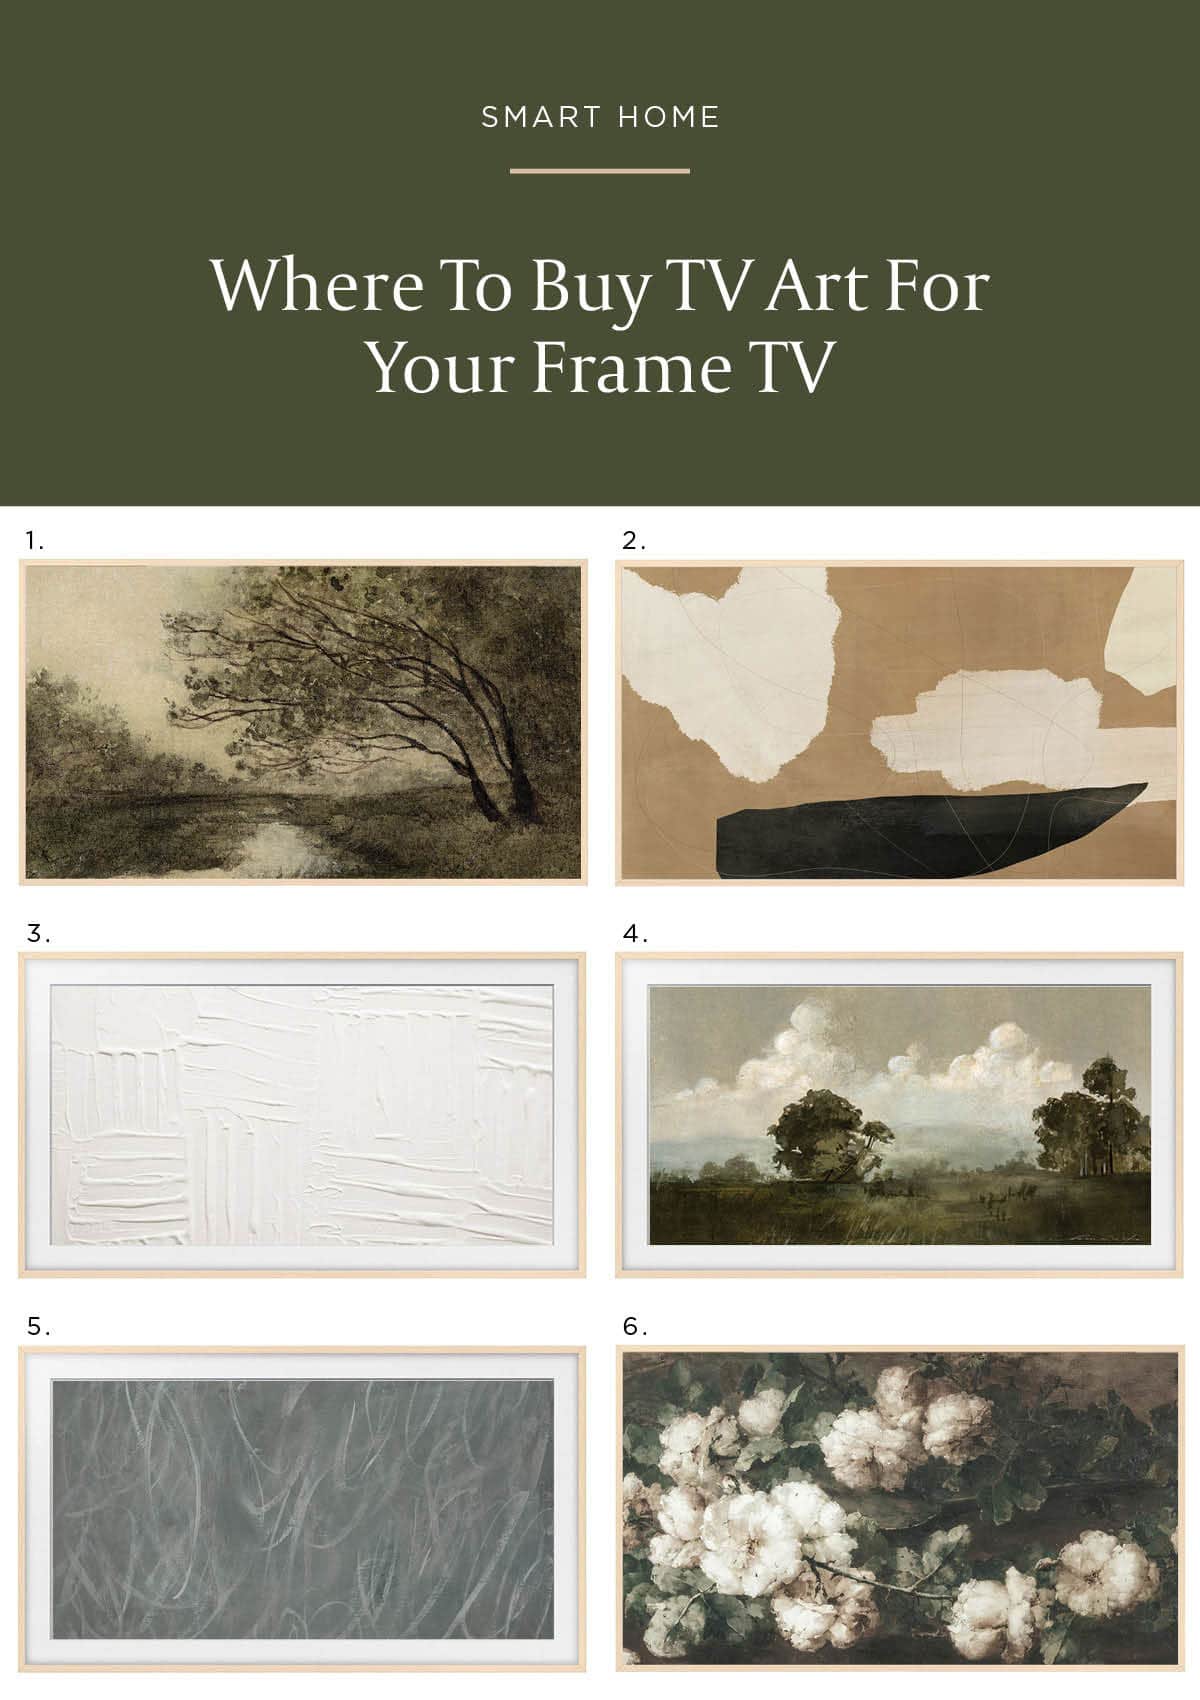 Where To Buy TV Art For The Samsung Frame TV - Did you know you can buy and download digital tv art for the Samsung Frame TV. Most are under $2. So affordable!